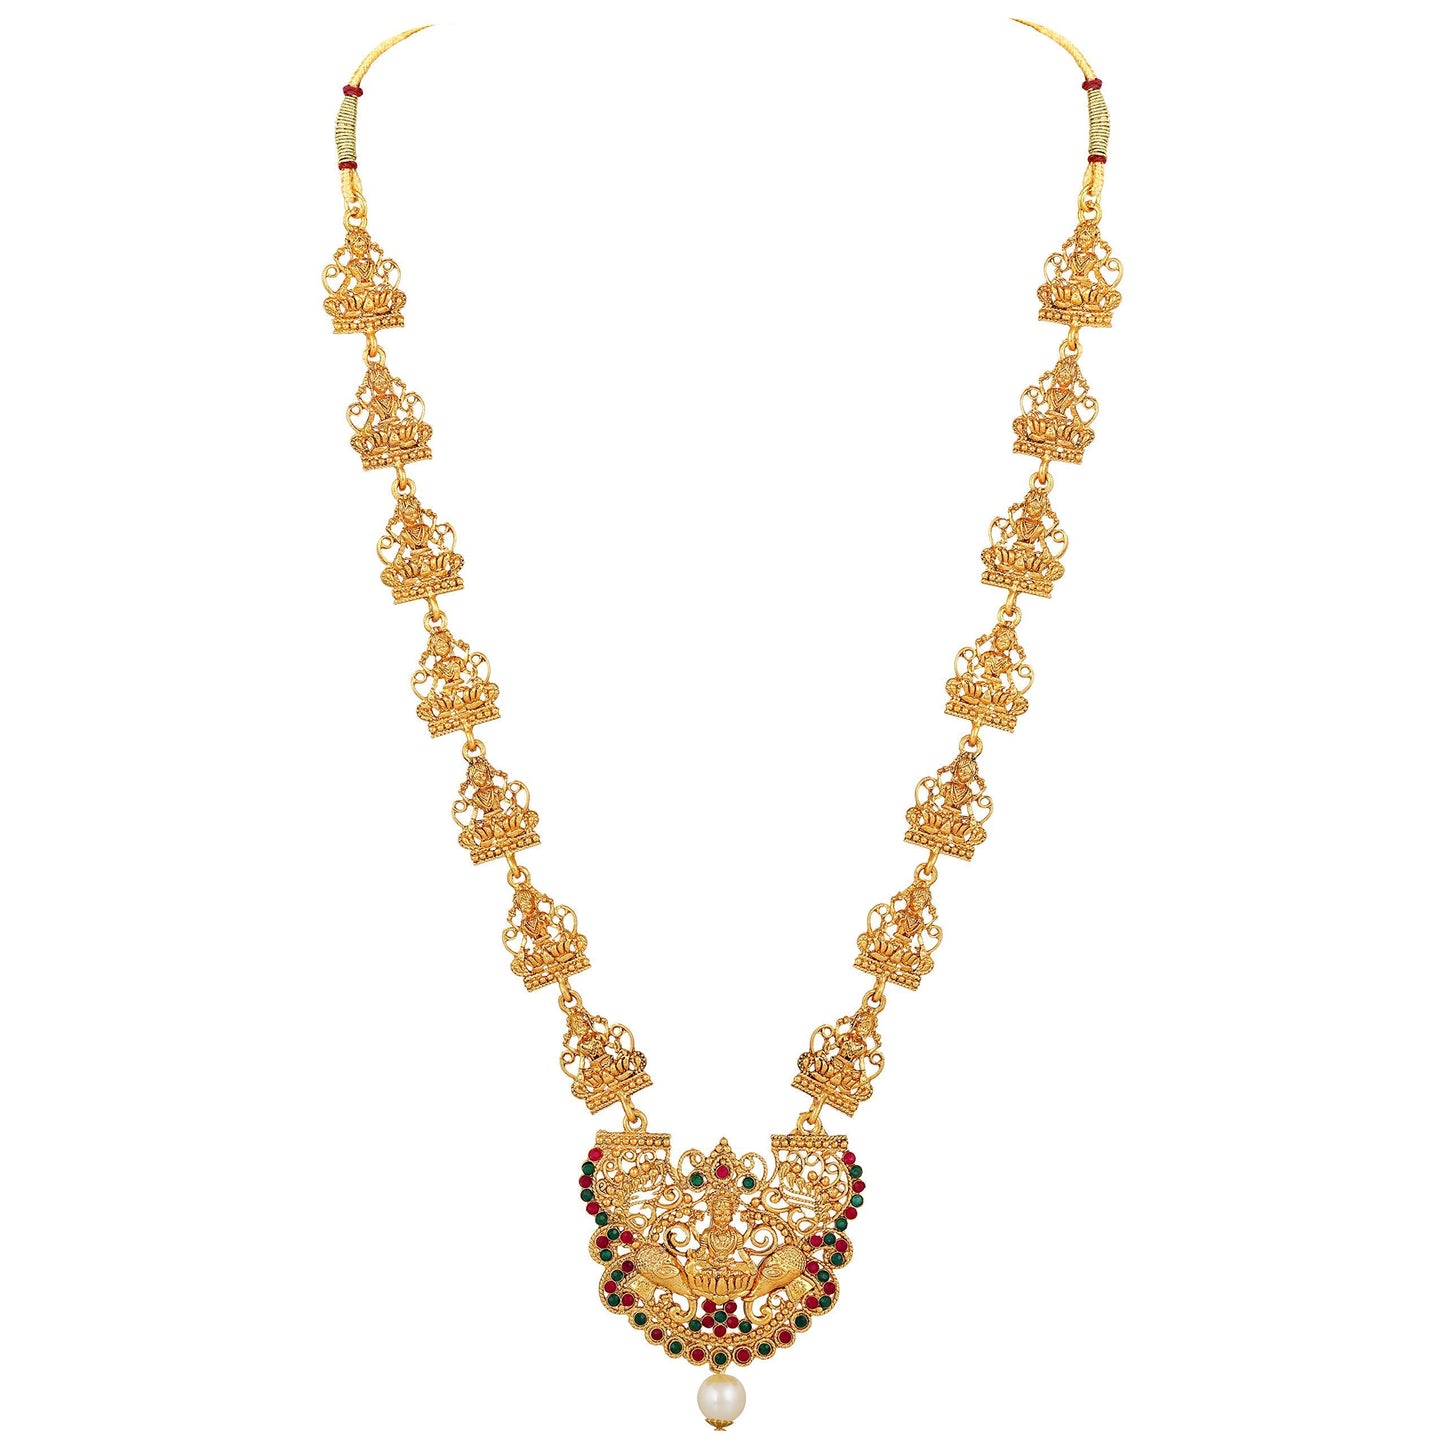 Shining Diva Fashion 18k Gold Plated Latest Long Short Combo Traditional Temple Necklace Jewellery Set for Women